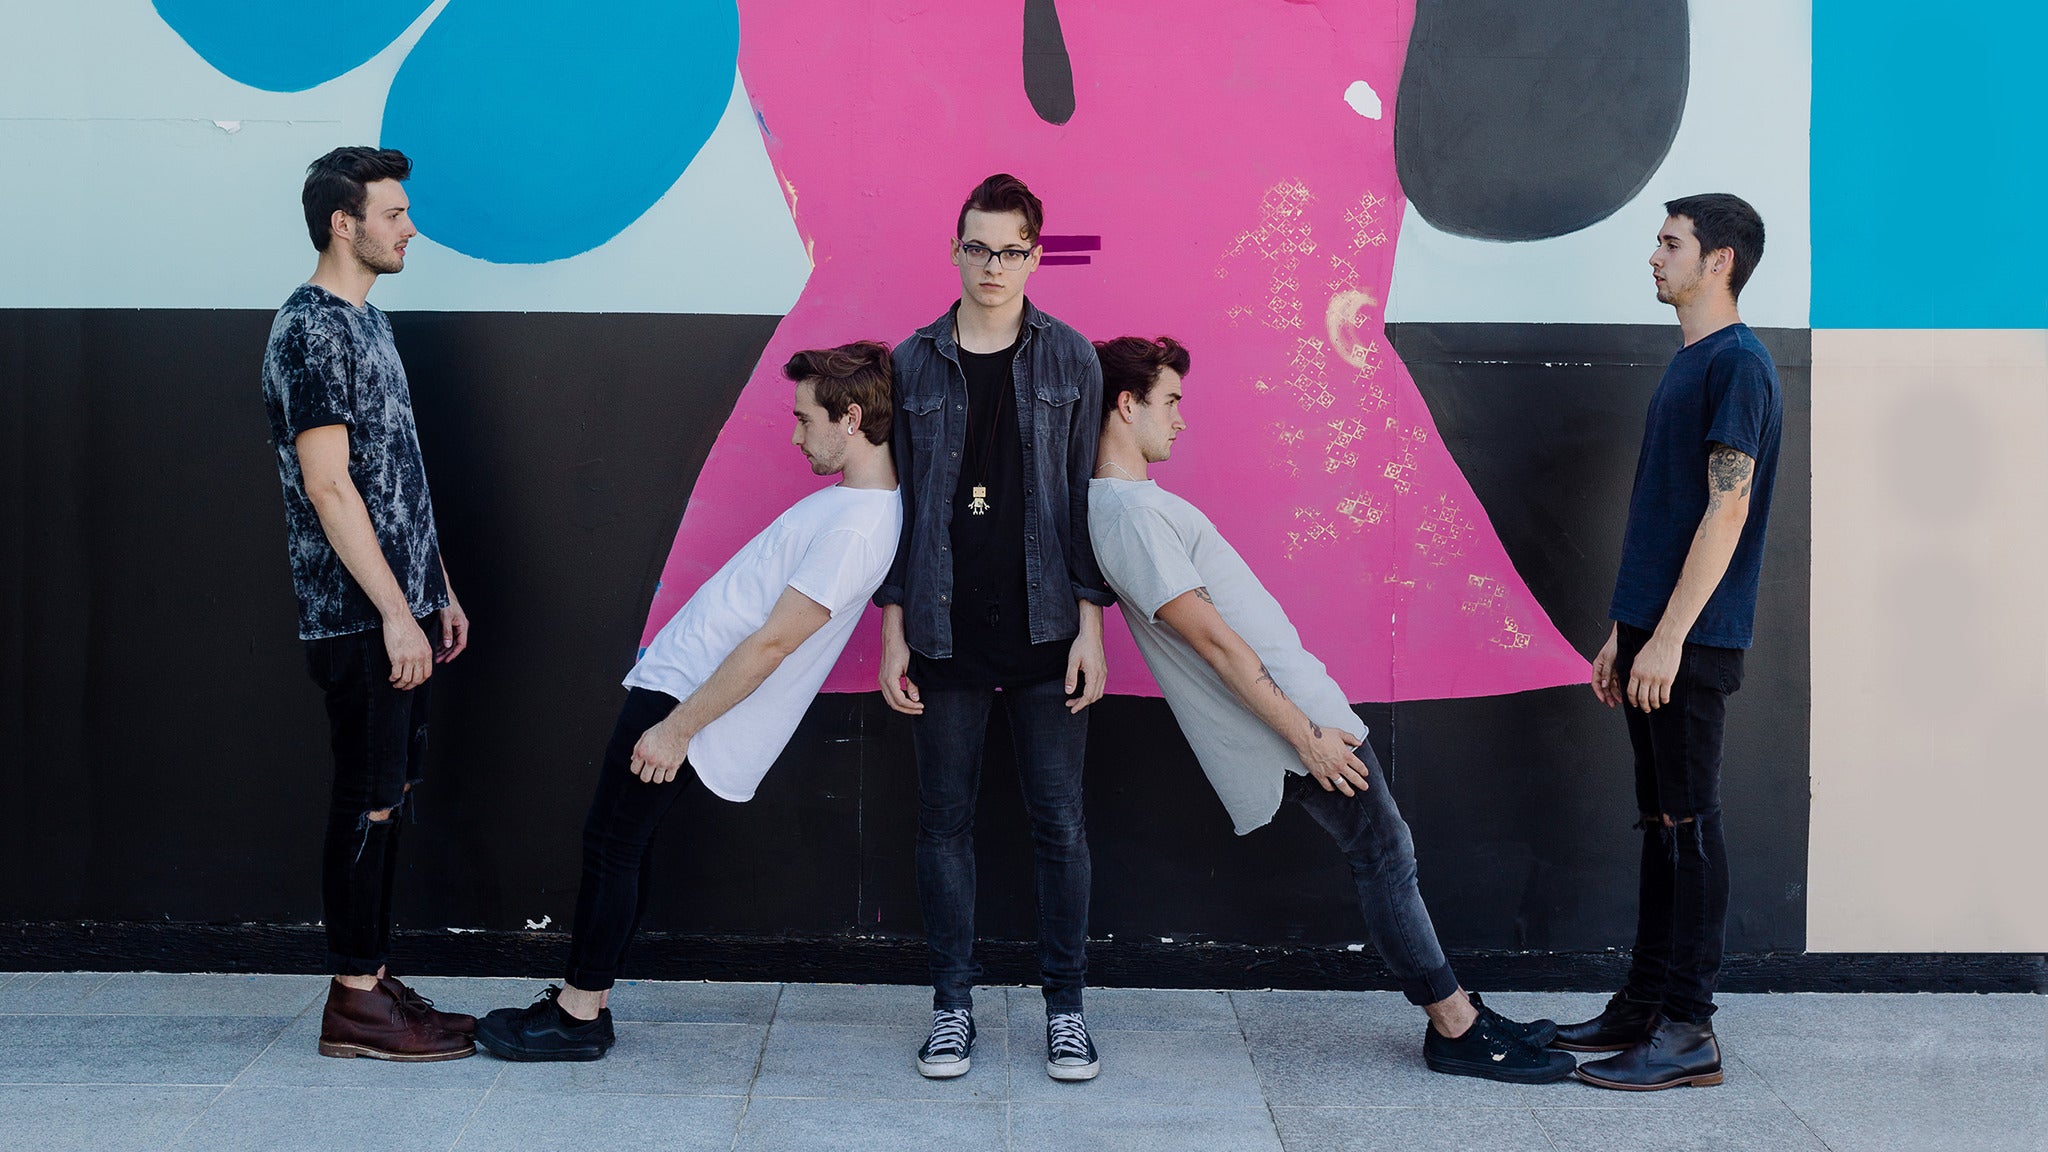 The Wrecks in Des Moines event information